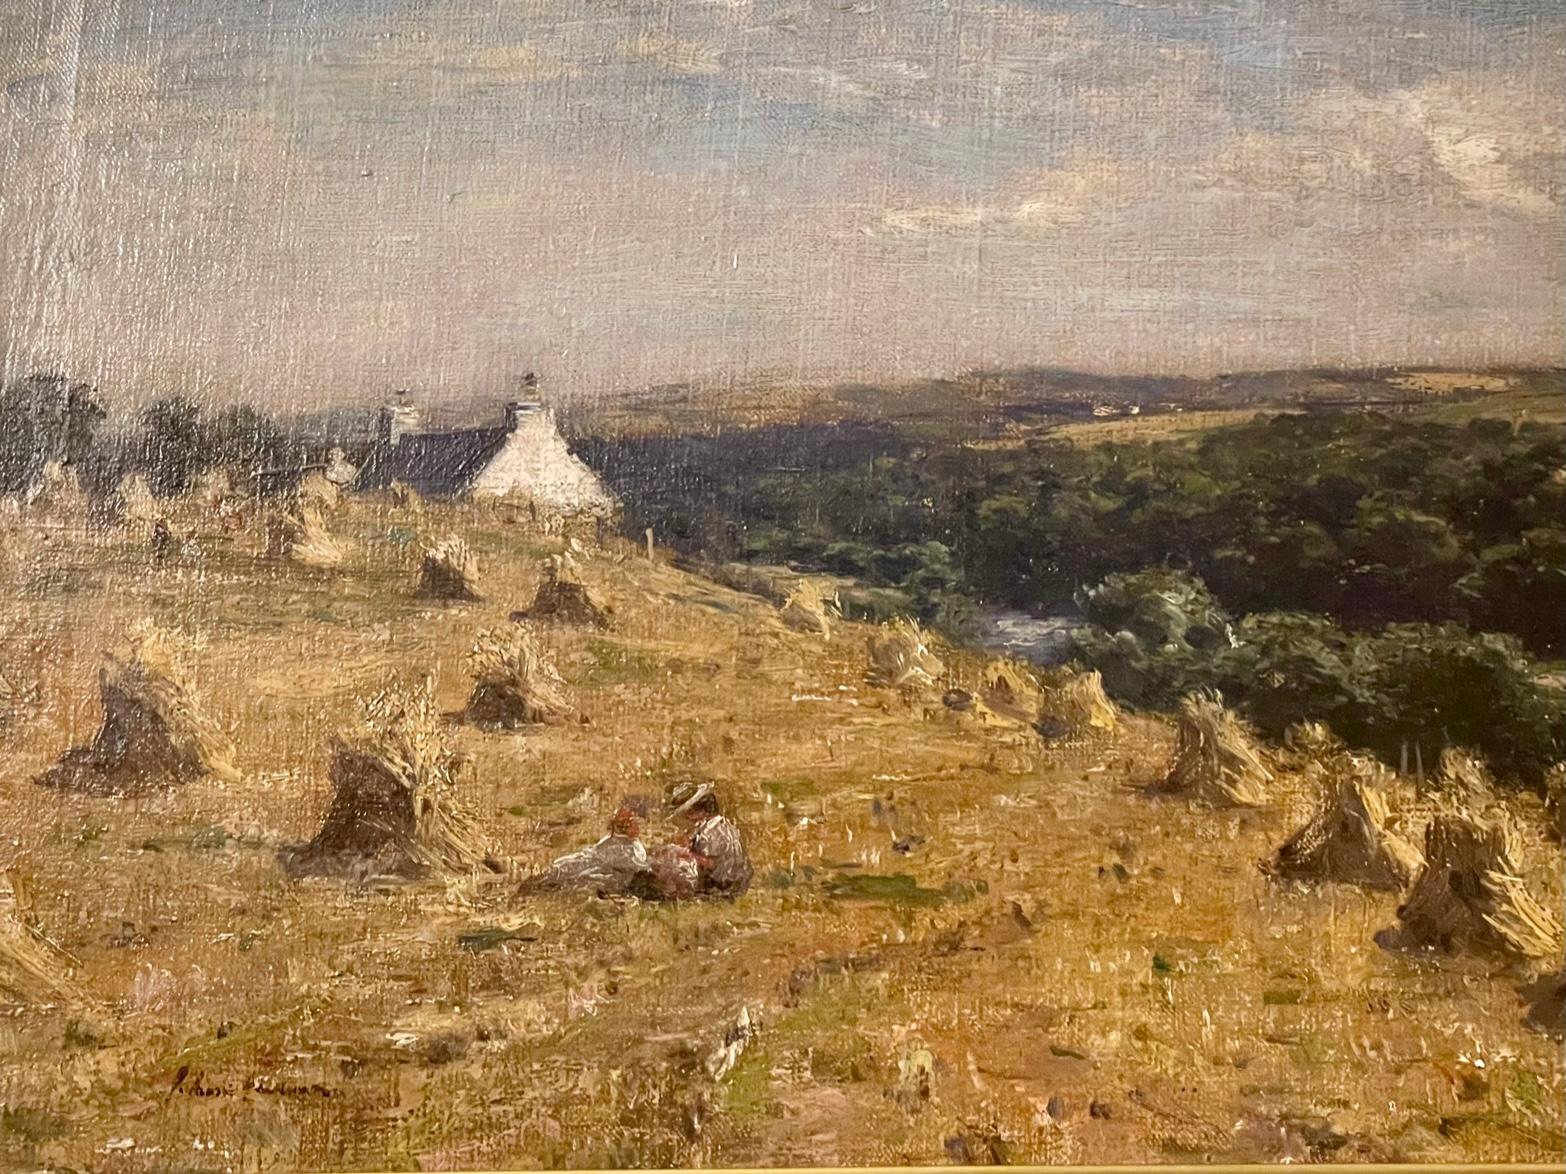   Harvest Time with Croft and Haystacks - Impressionist Painting by Joseph Morris Henderson